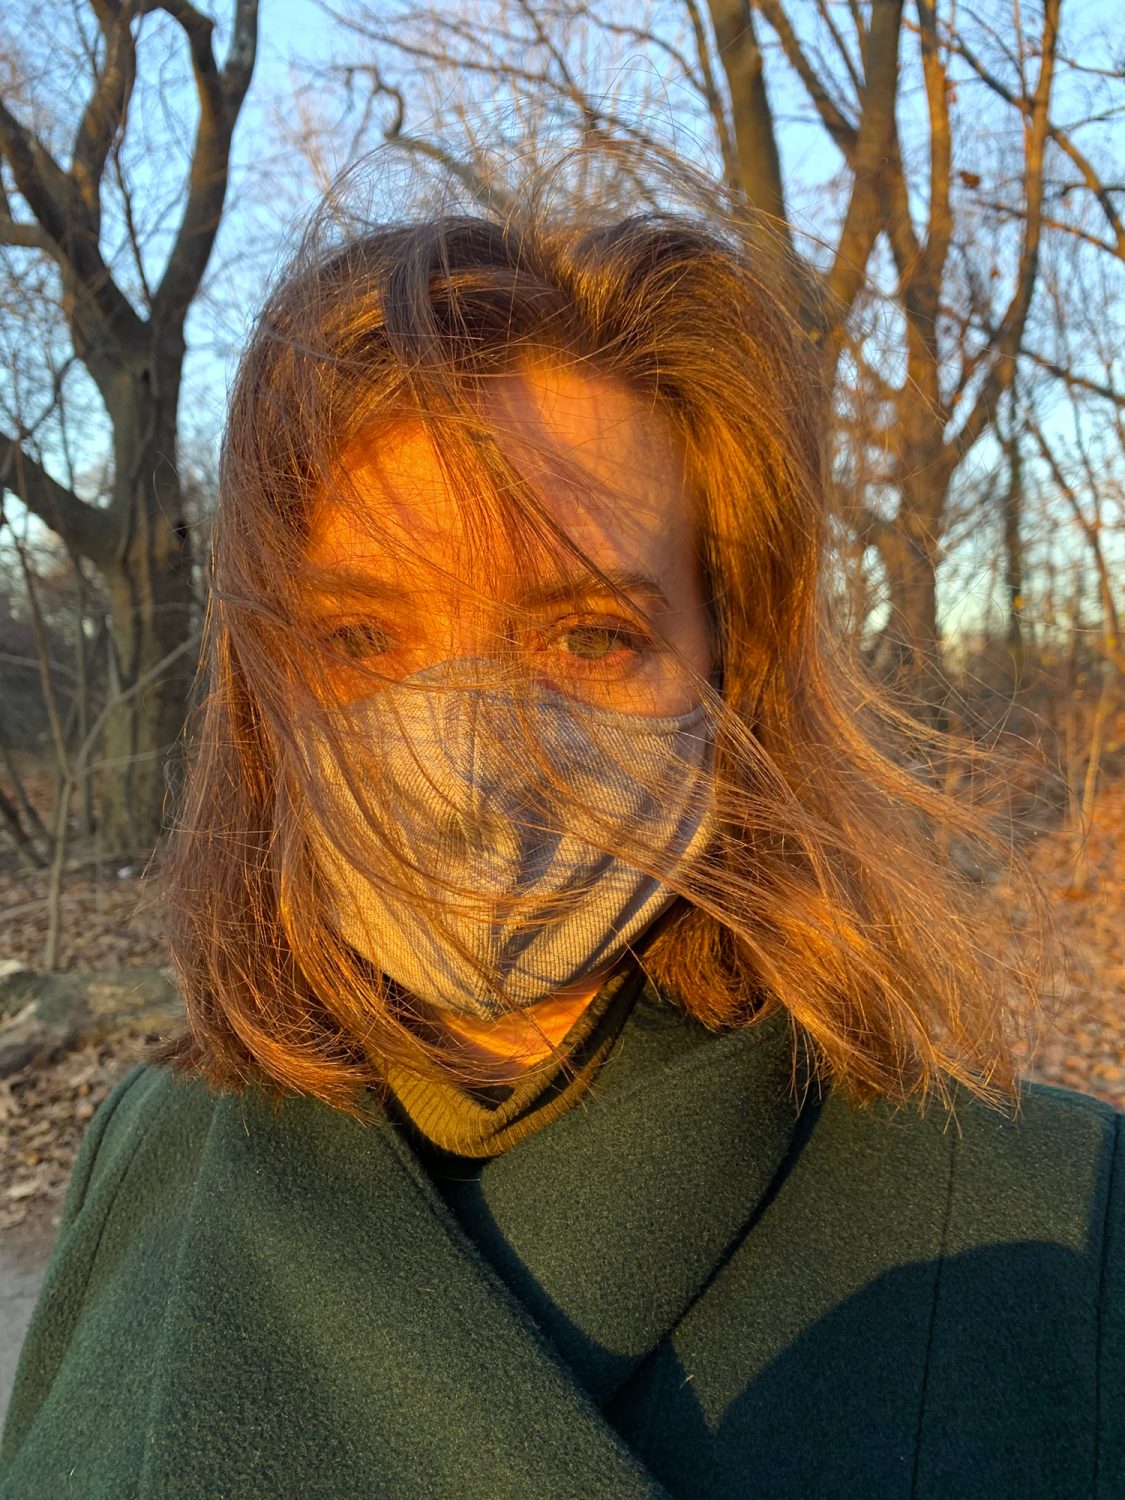 Mary in Prospect Park December 2020 Pretty Red Light Accross Red Hair and Grey Mask